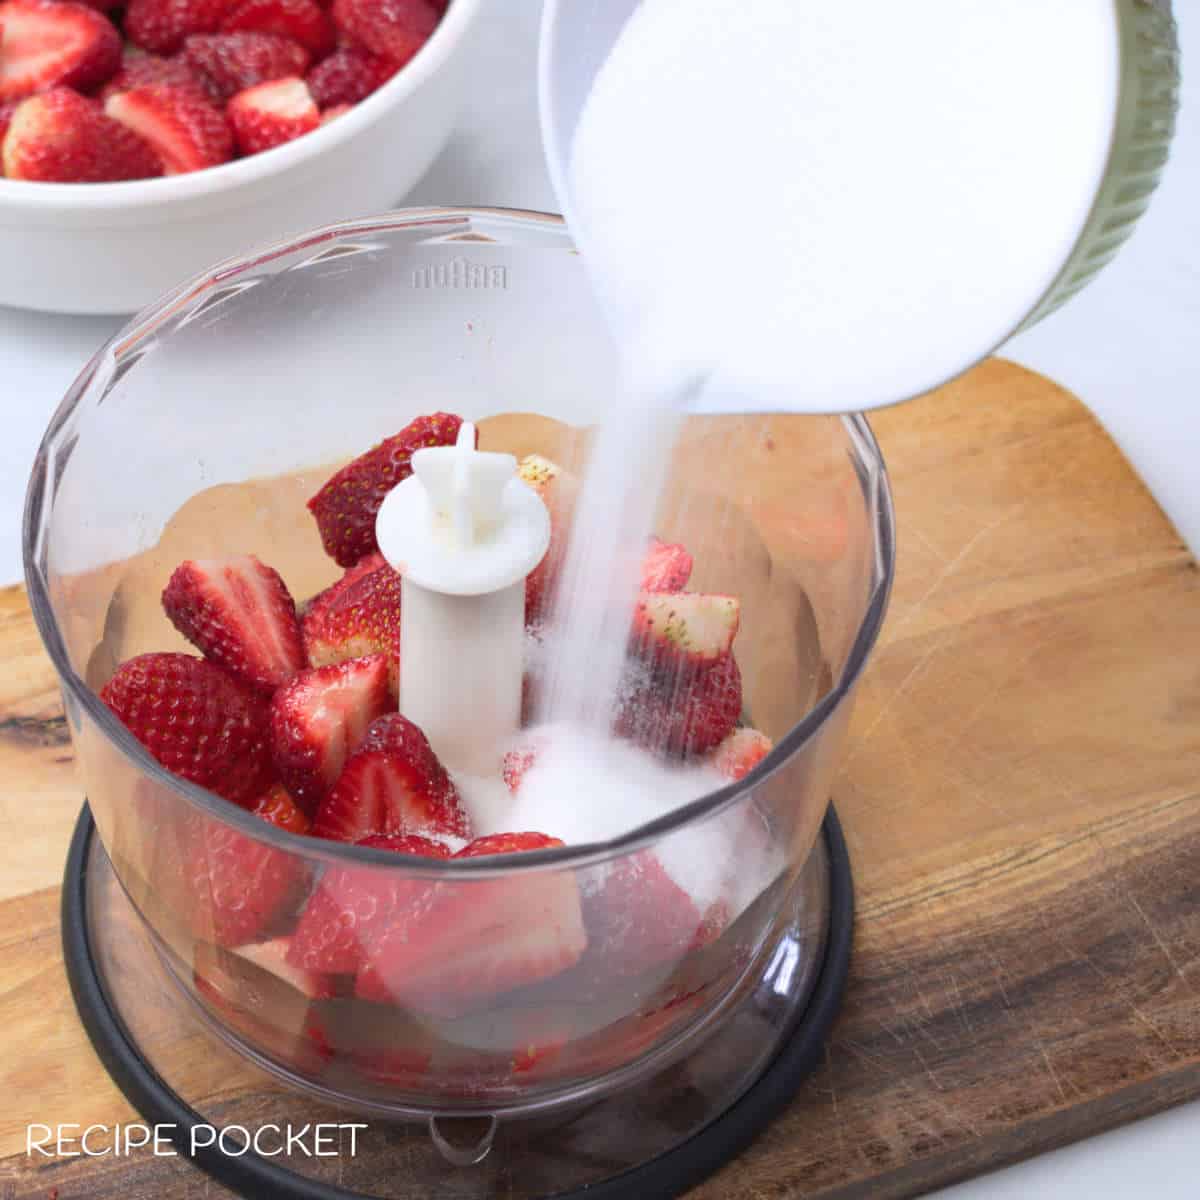 Sugar being poured over strawberries in a blender.